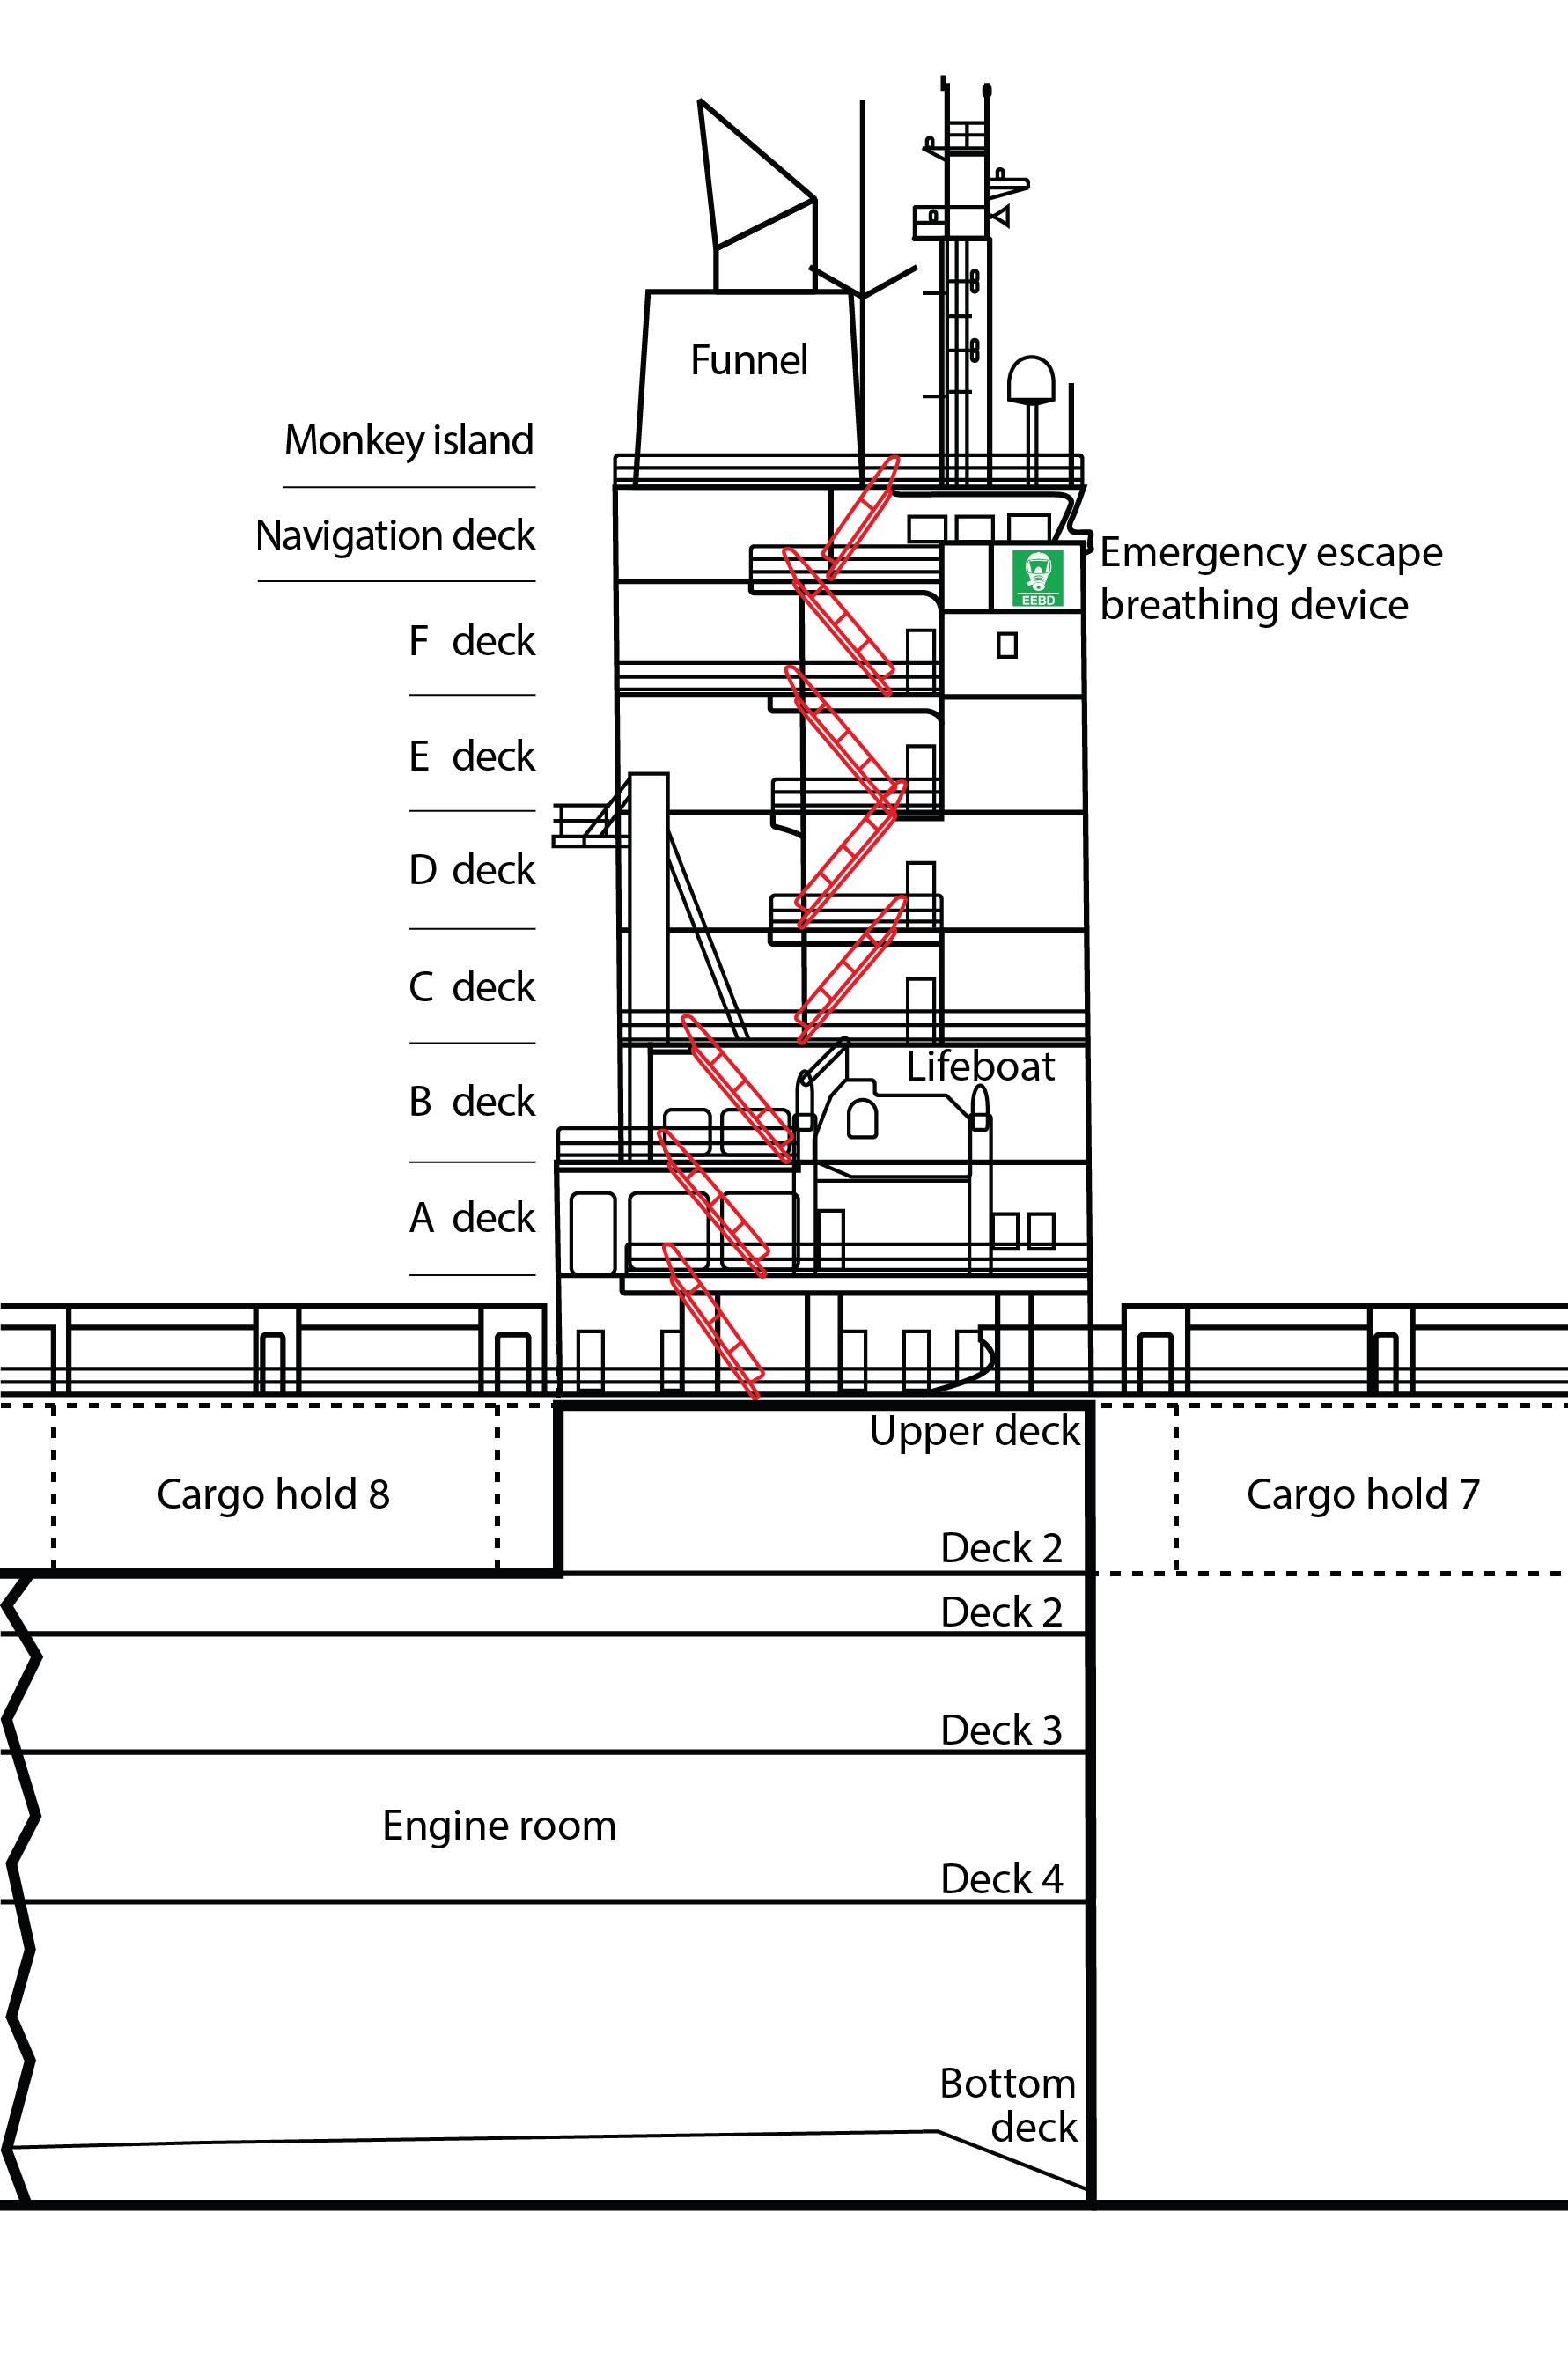 Starboard-side cross-section view of the decks on the vessel and superstructure (Source: TSB, based on the vessel’s general arrangement drawings dated 27 July 2006)